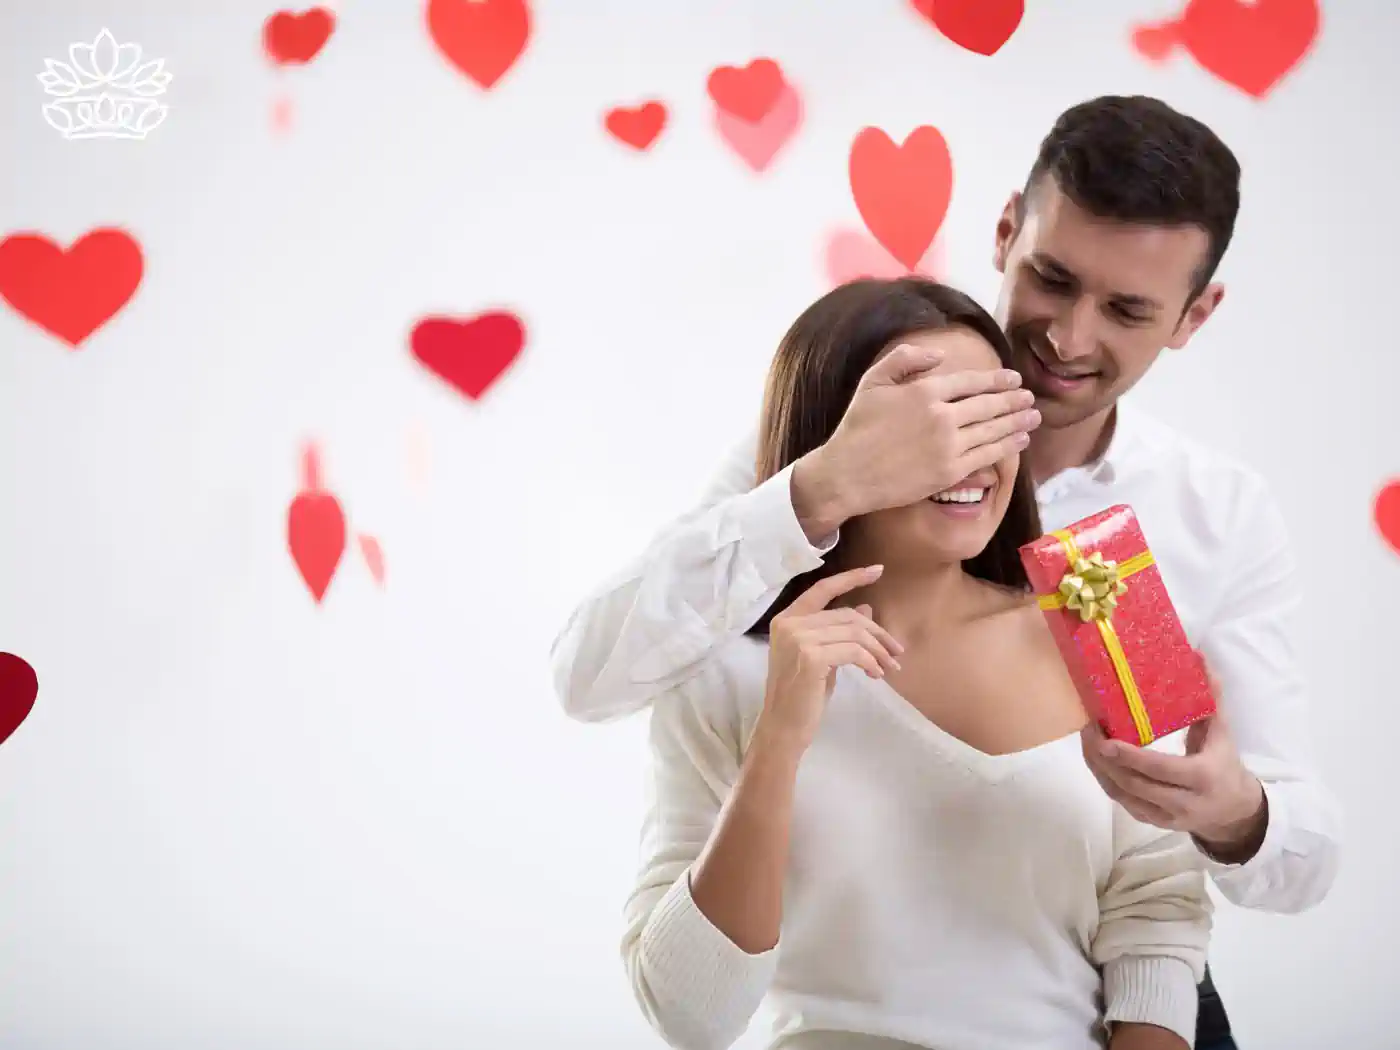 A man surprising a woman with a red gift box, surrounded by floating red hearts, highlighting the joy of gift-giving. Fabulous Flowers and Gifts. Romantic Gift Boxes.